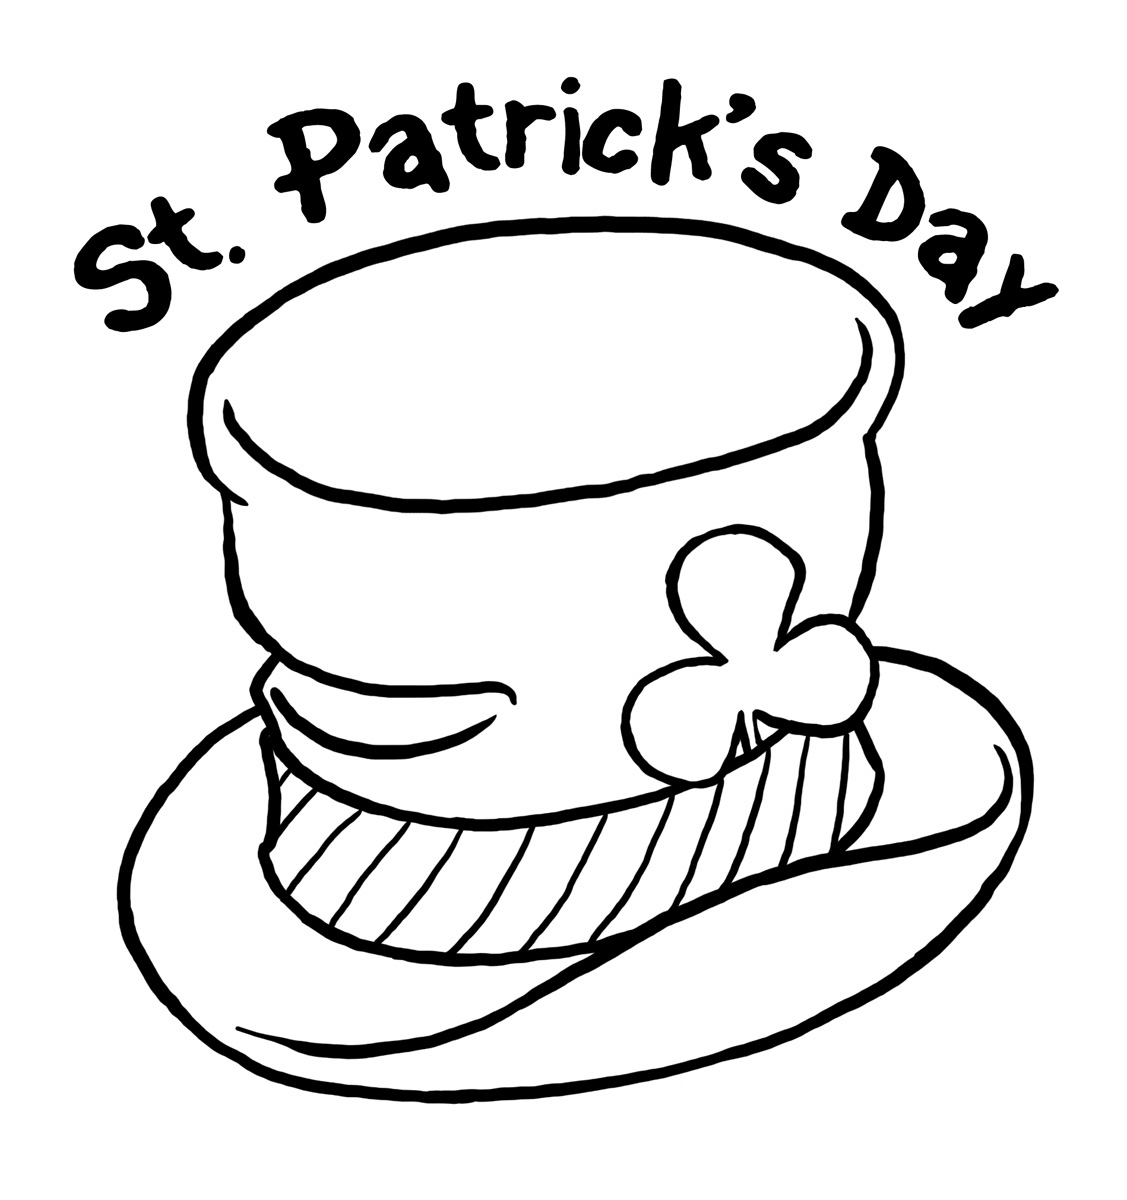 Coloring Pages For St. Patrick 1